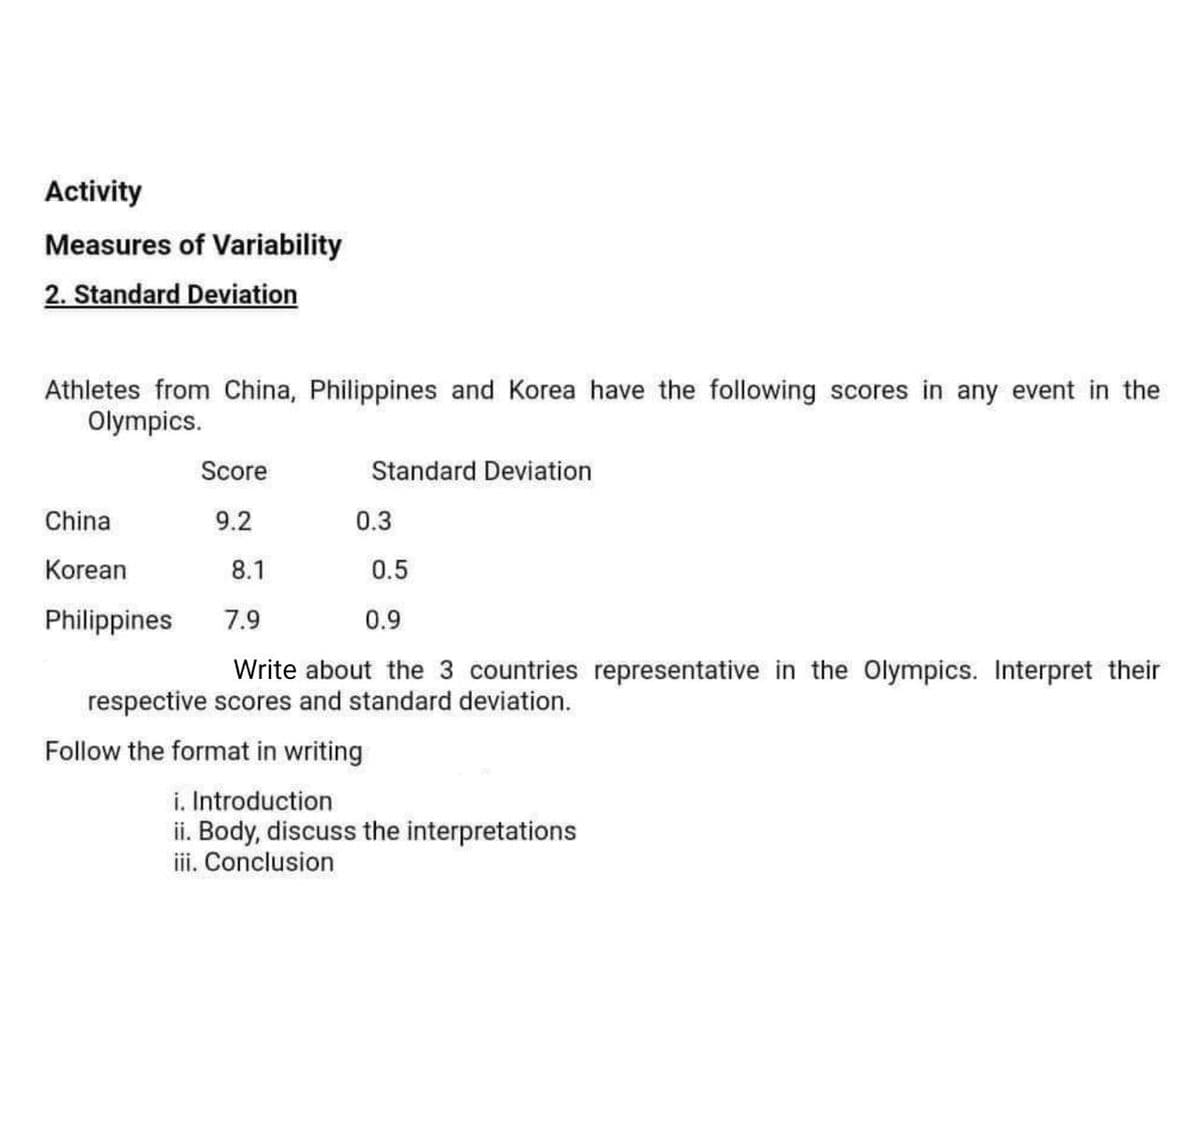 Activity
Measures of Variability
2. Standard Deviation
Athletes from China, Philippines and Korea have the following scores in any event in the
Olympics.
Score
Standard Deviation
China
9.2
0.3
Korean
8.1
Philippines
7.9
0.9
Write about the 3 countries representative in the Olympics. Interpret their
respective scores and standard deviation.
Follow the format in writing
i. Introduction
ii. Body, discuss the interpretations
iii. Conclusion
0.5